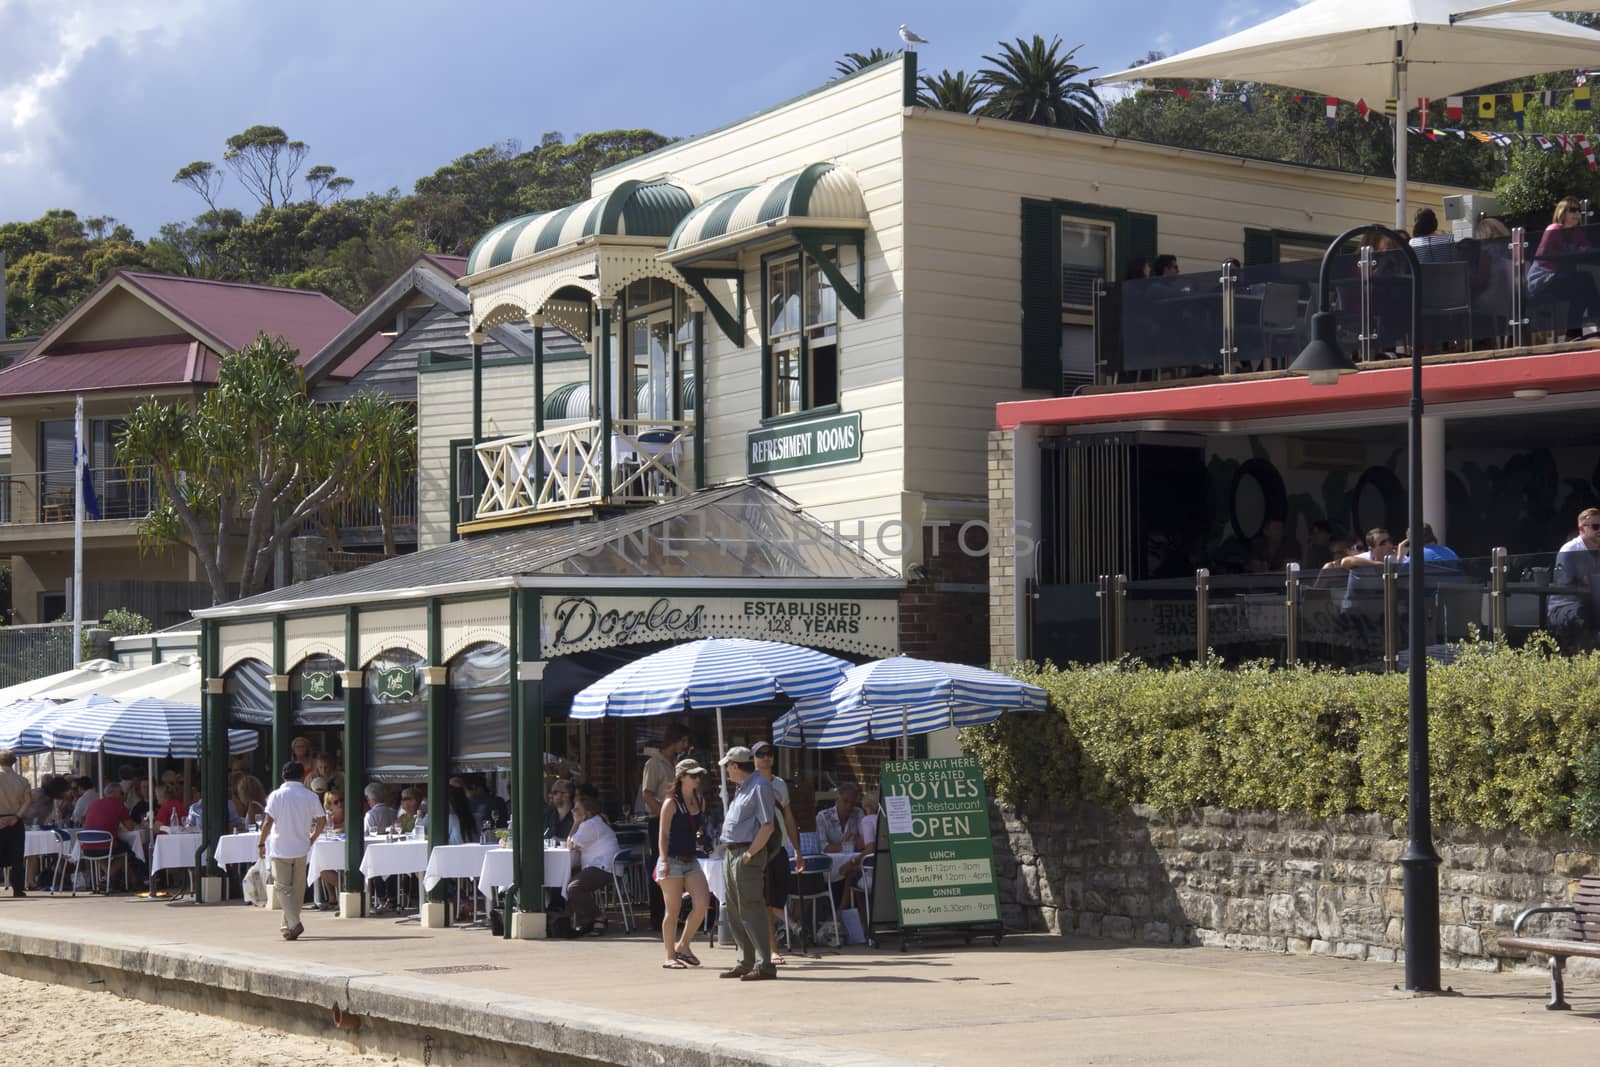 Sydney, Australia- 23th March 2013: Doyle's restaurant in Watson's Bay. The reataurant has been run by 5 generations of the Doyle family since opening in 1885.